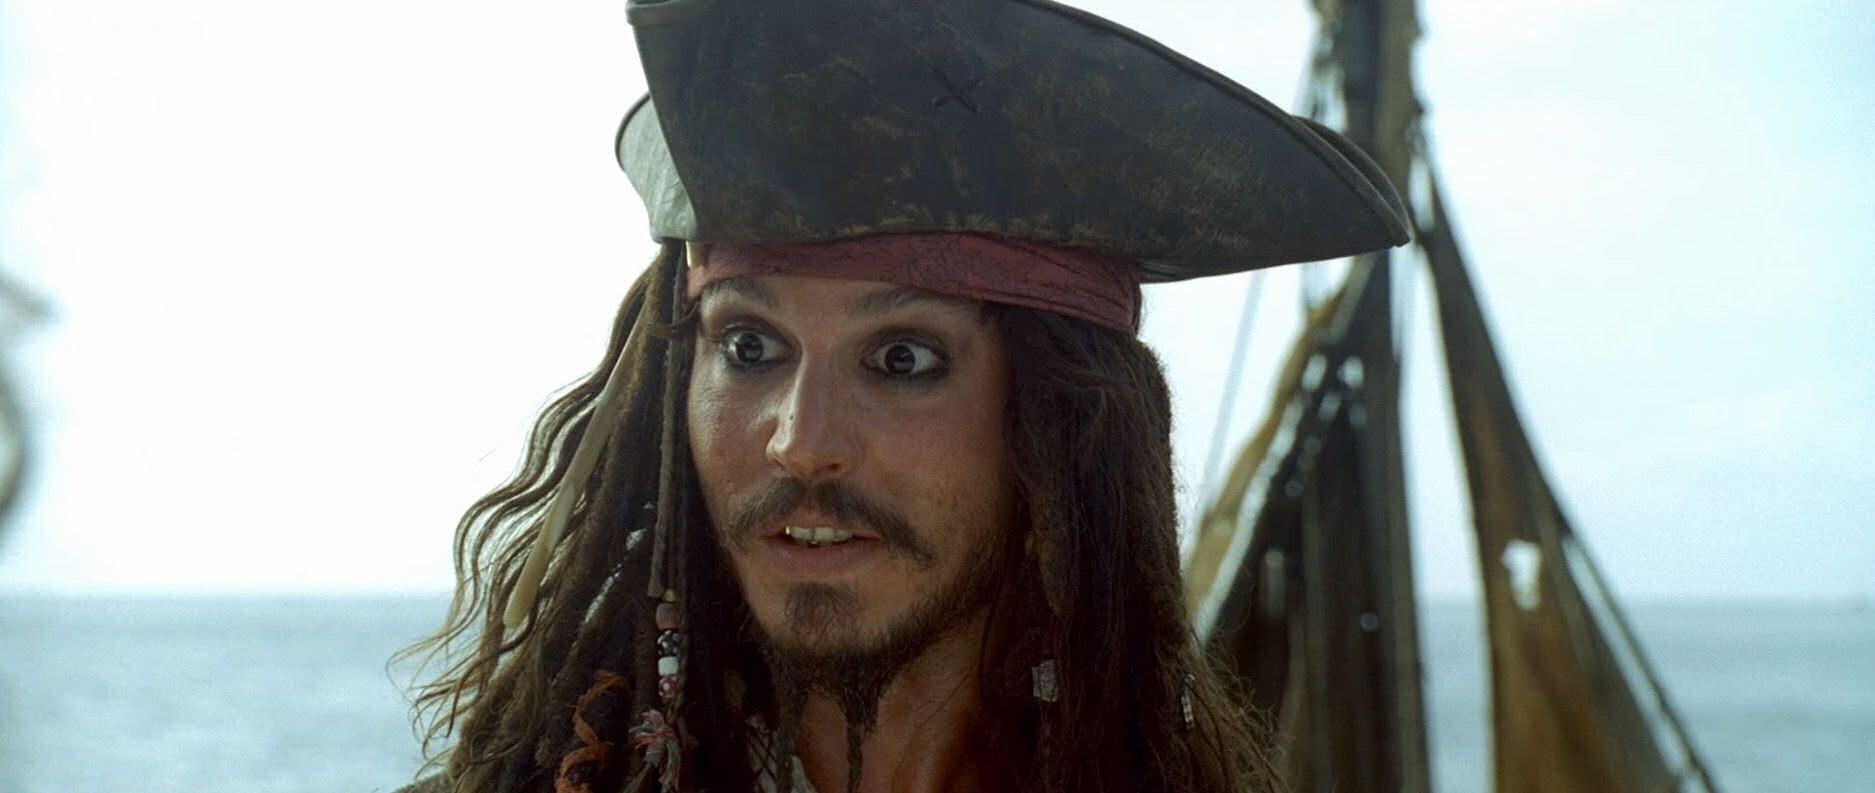 http://i4.photobucket.com/albums/y144/deepintodepp/Pirates%20At%20Worlds%20End/ScreenCaps%20from%20Clips/000000619.jpg